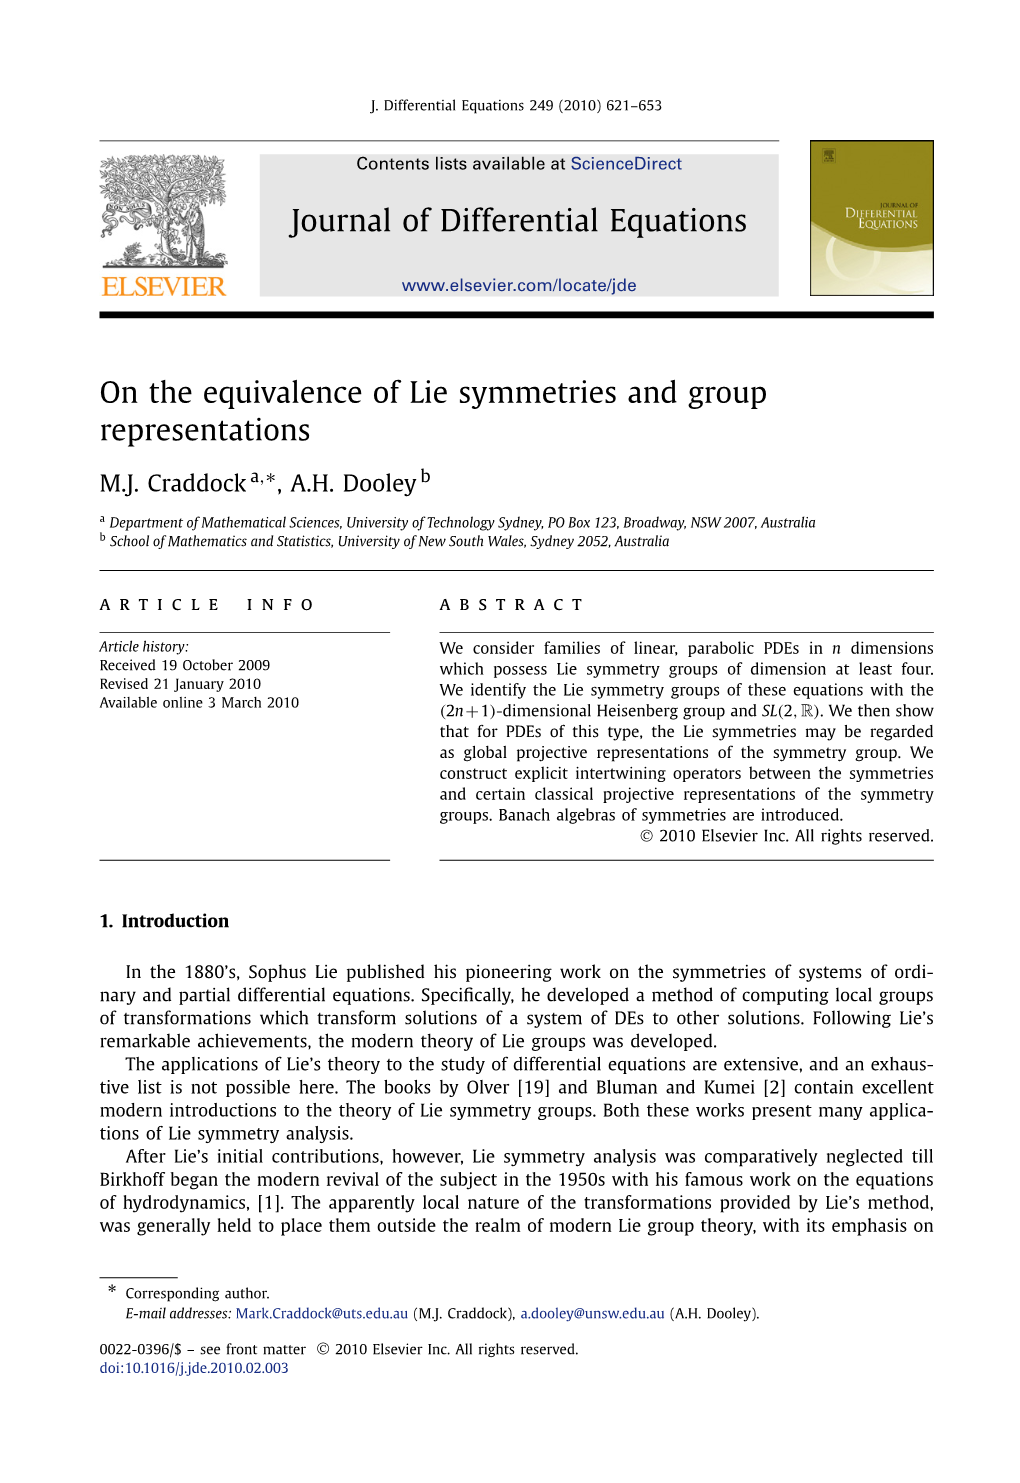 On the Equivalence of Lie Symmetries and Group Representations ∗ M.J